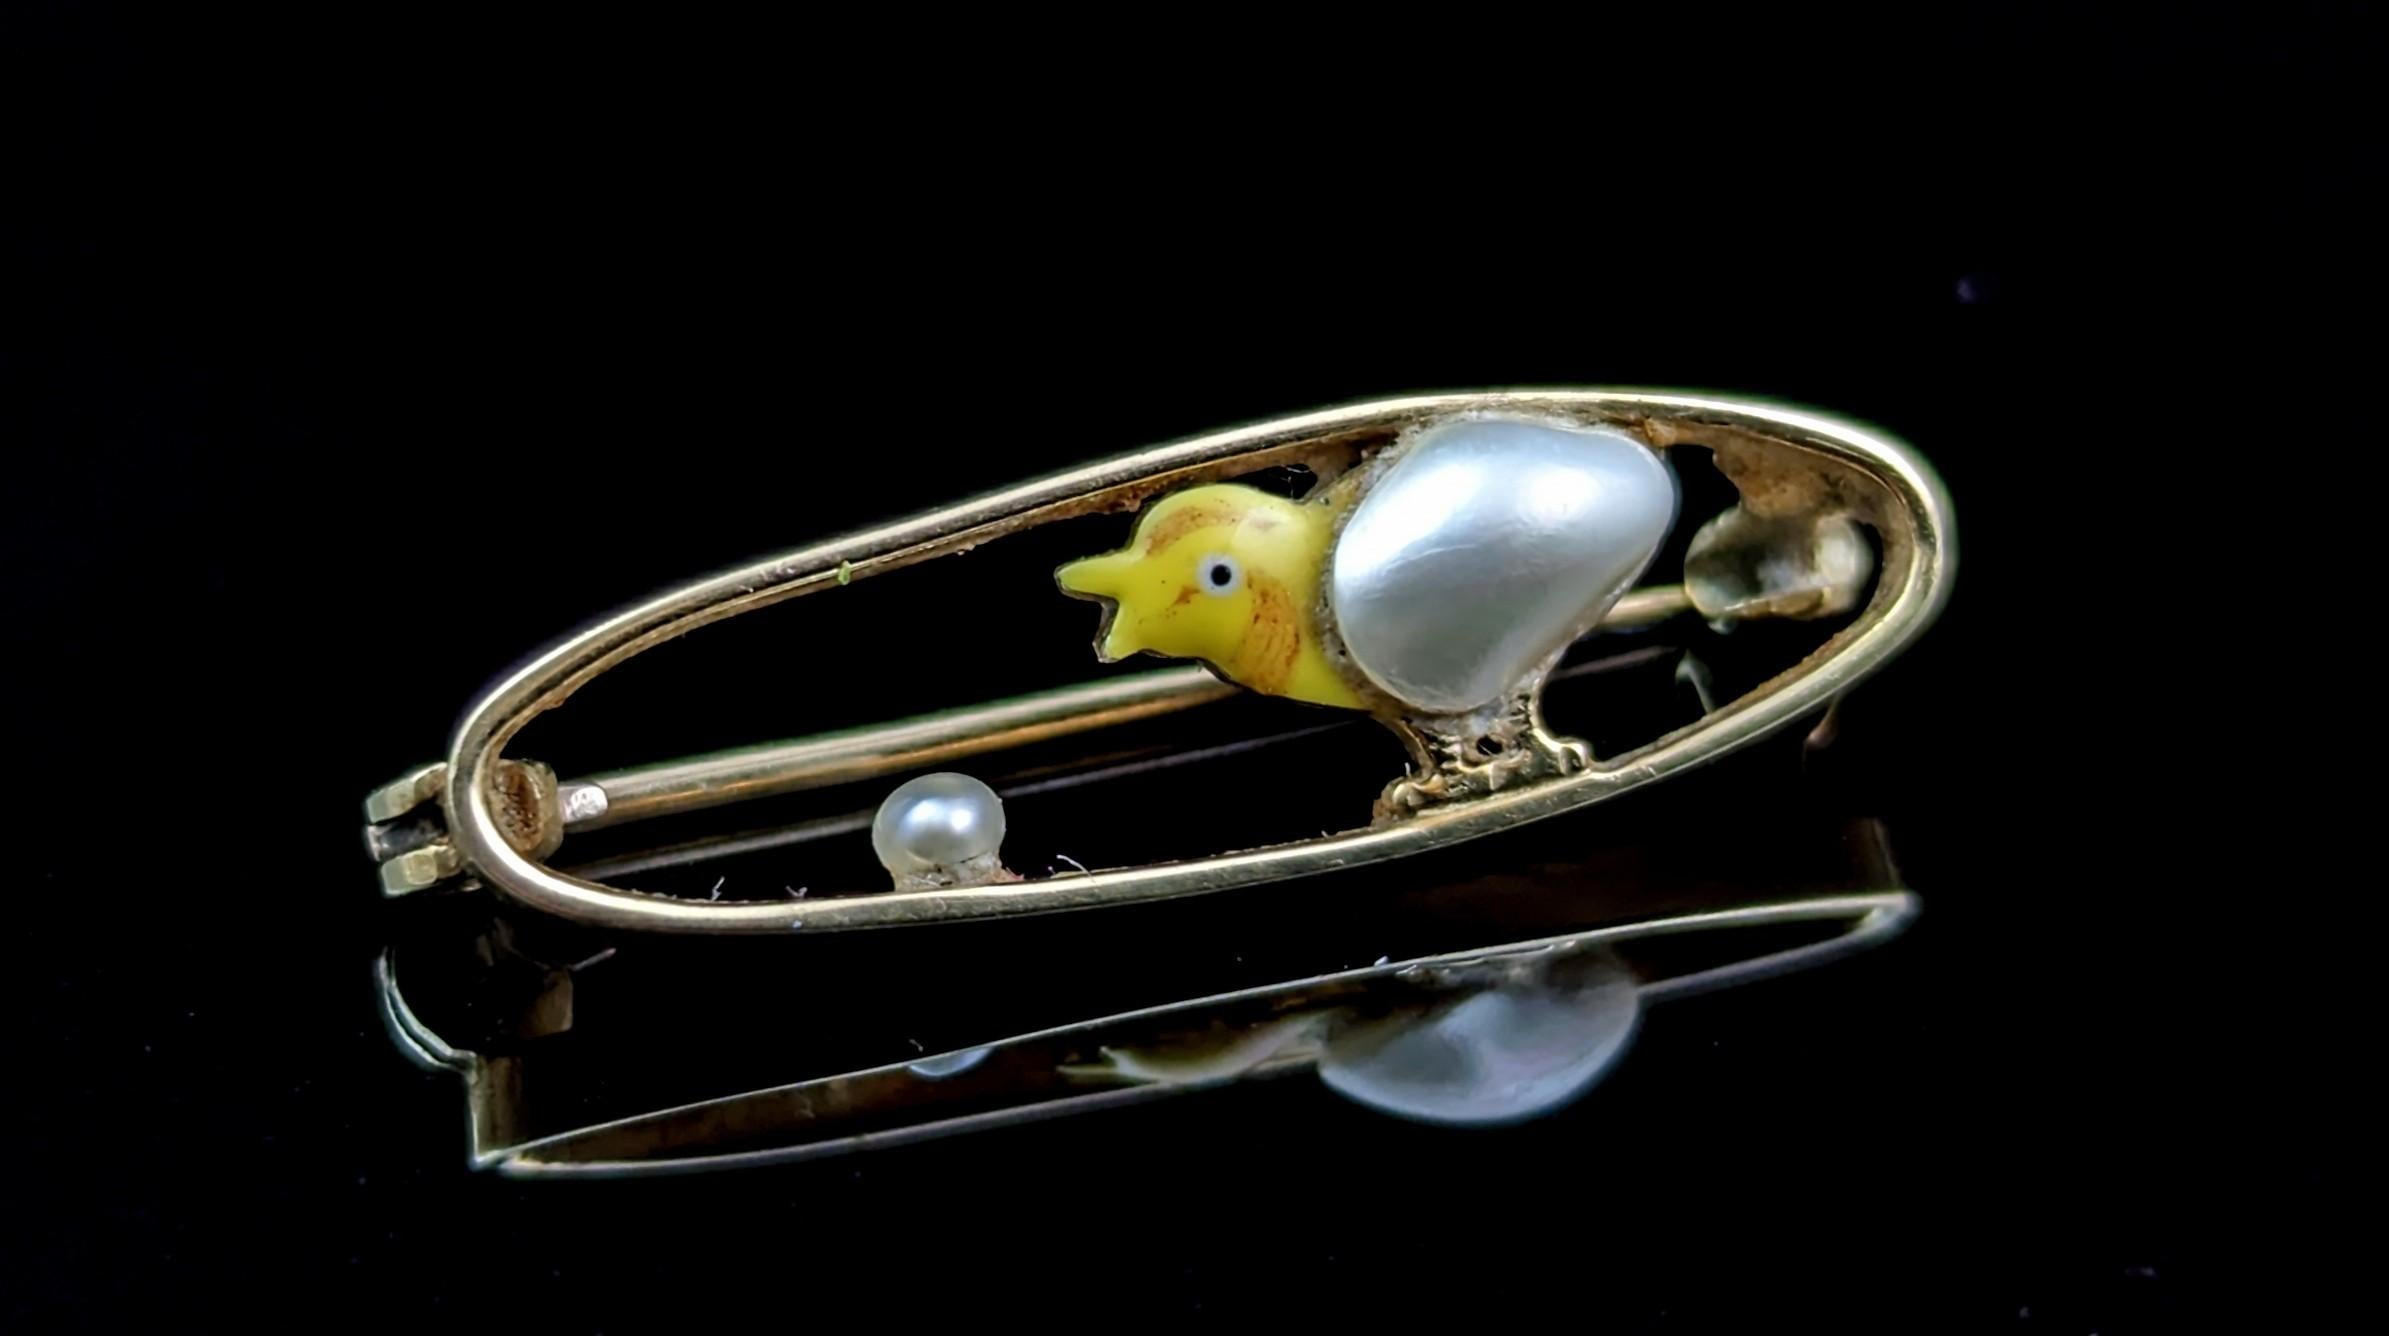 Isn't this dainty antique 15kt gold chick brooch just the sweetest thing?

A teeny little open gold oval in 15kt yellow gold with a tiny little enamelled yellow and baroque pearl baby chick standing within.

There is a small seed pearl as a grain